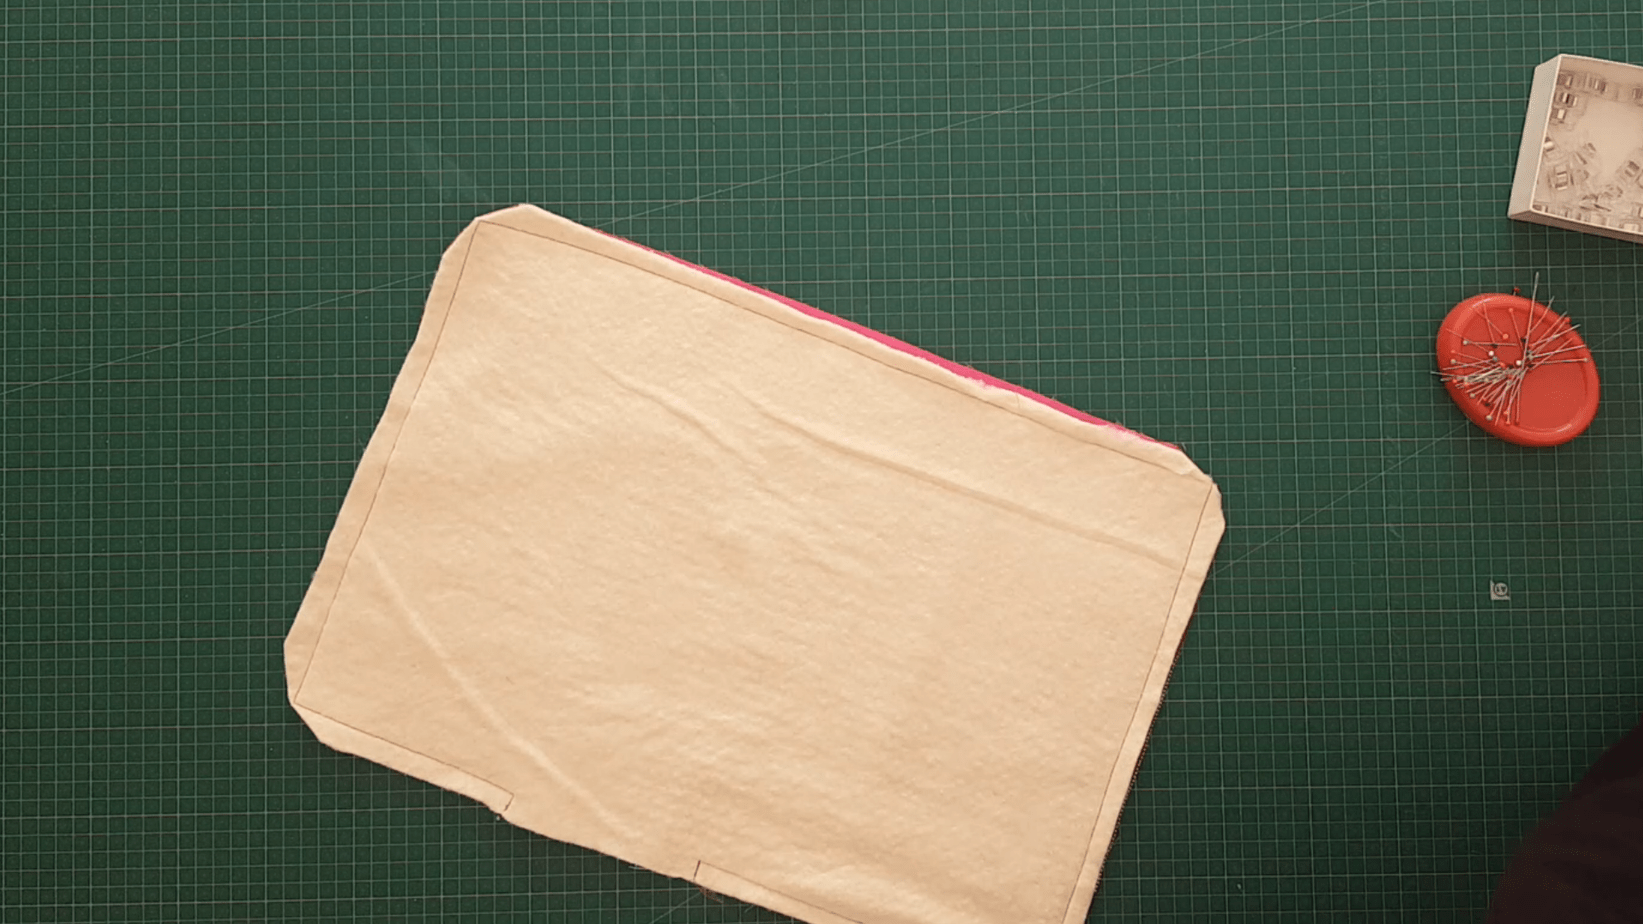 Rectangle of fabric sewn together and with corners of the fabric clipped.